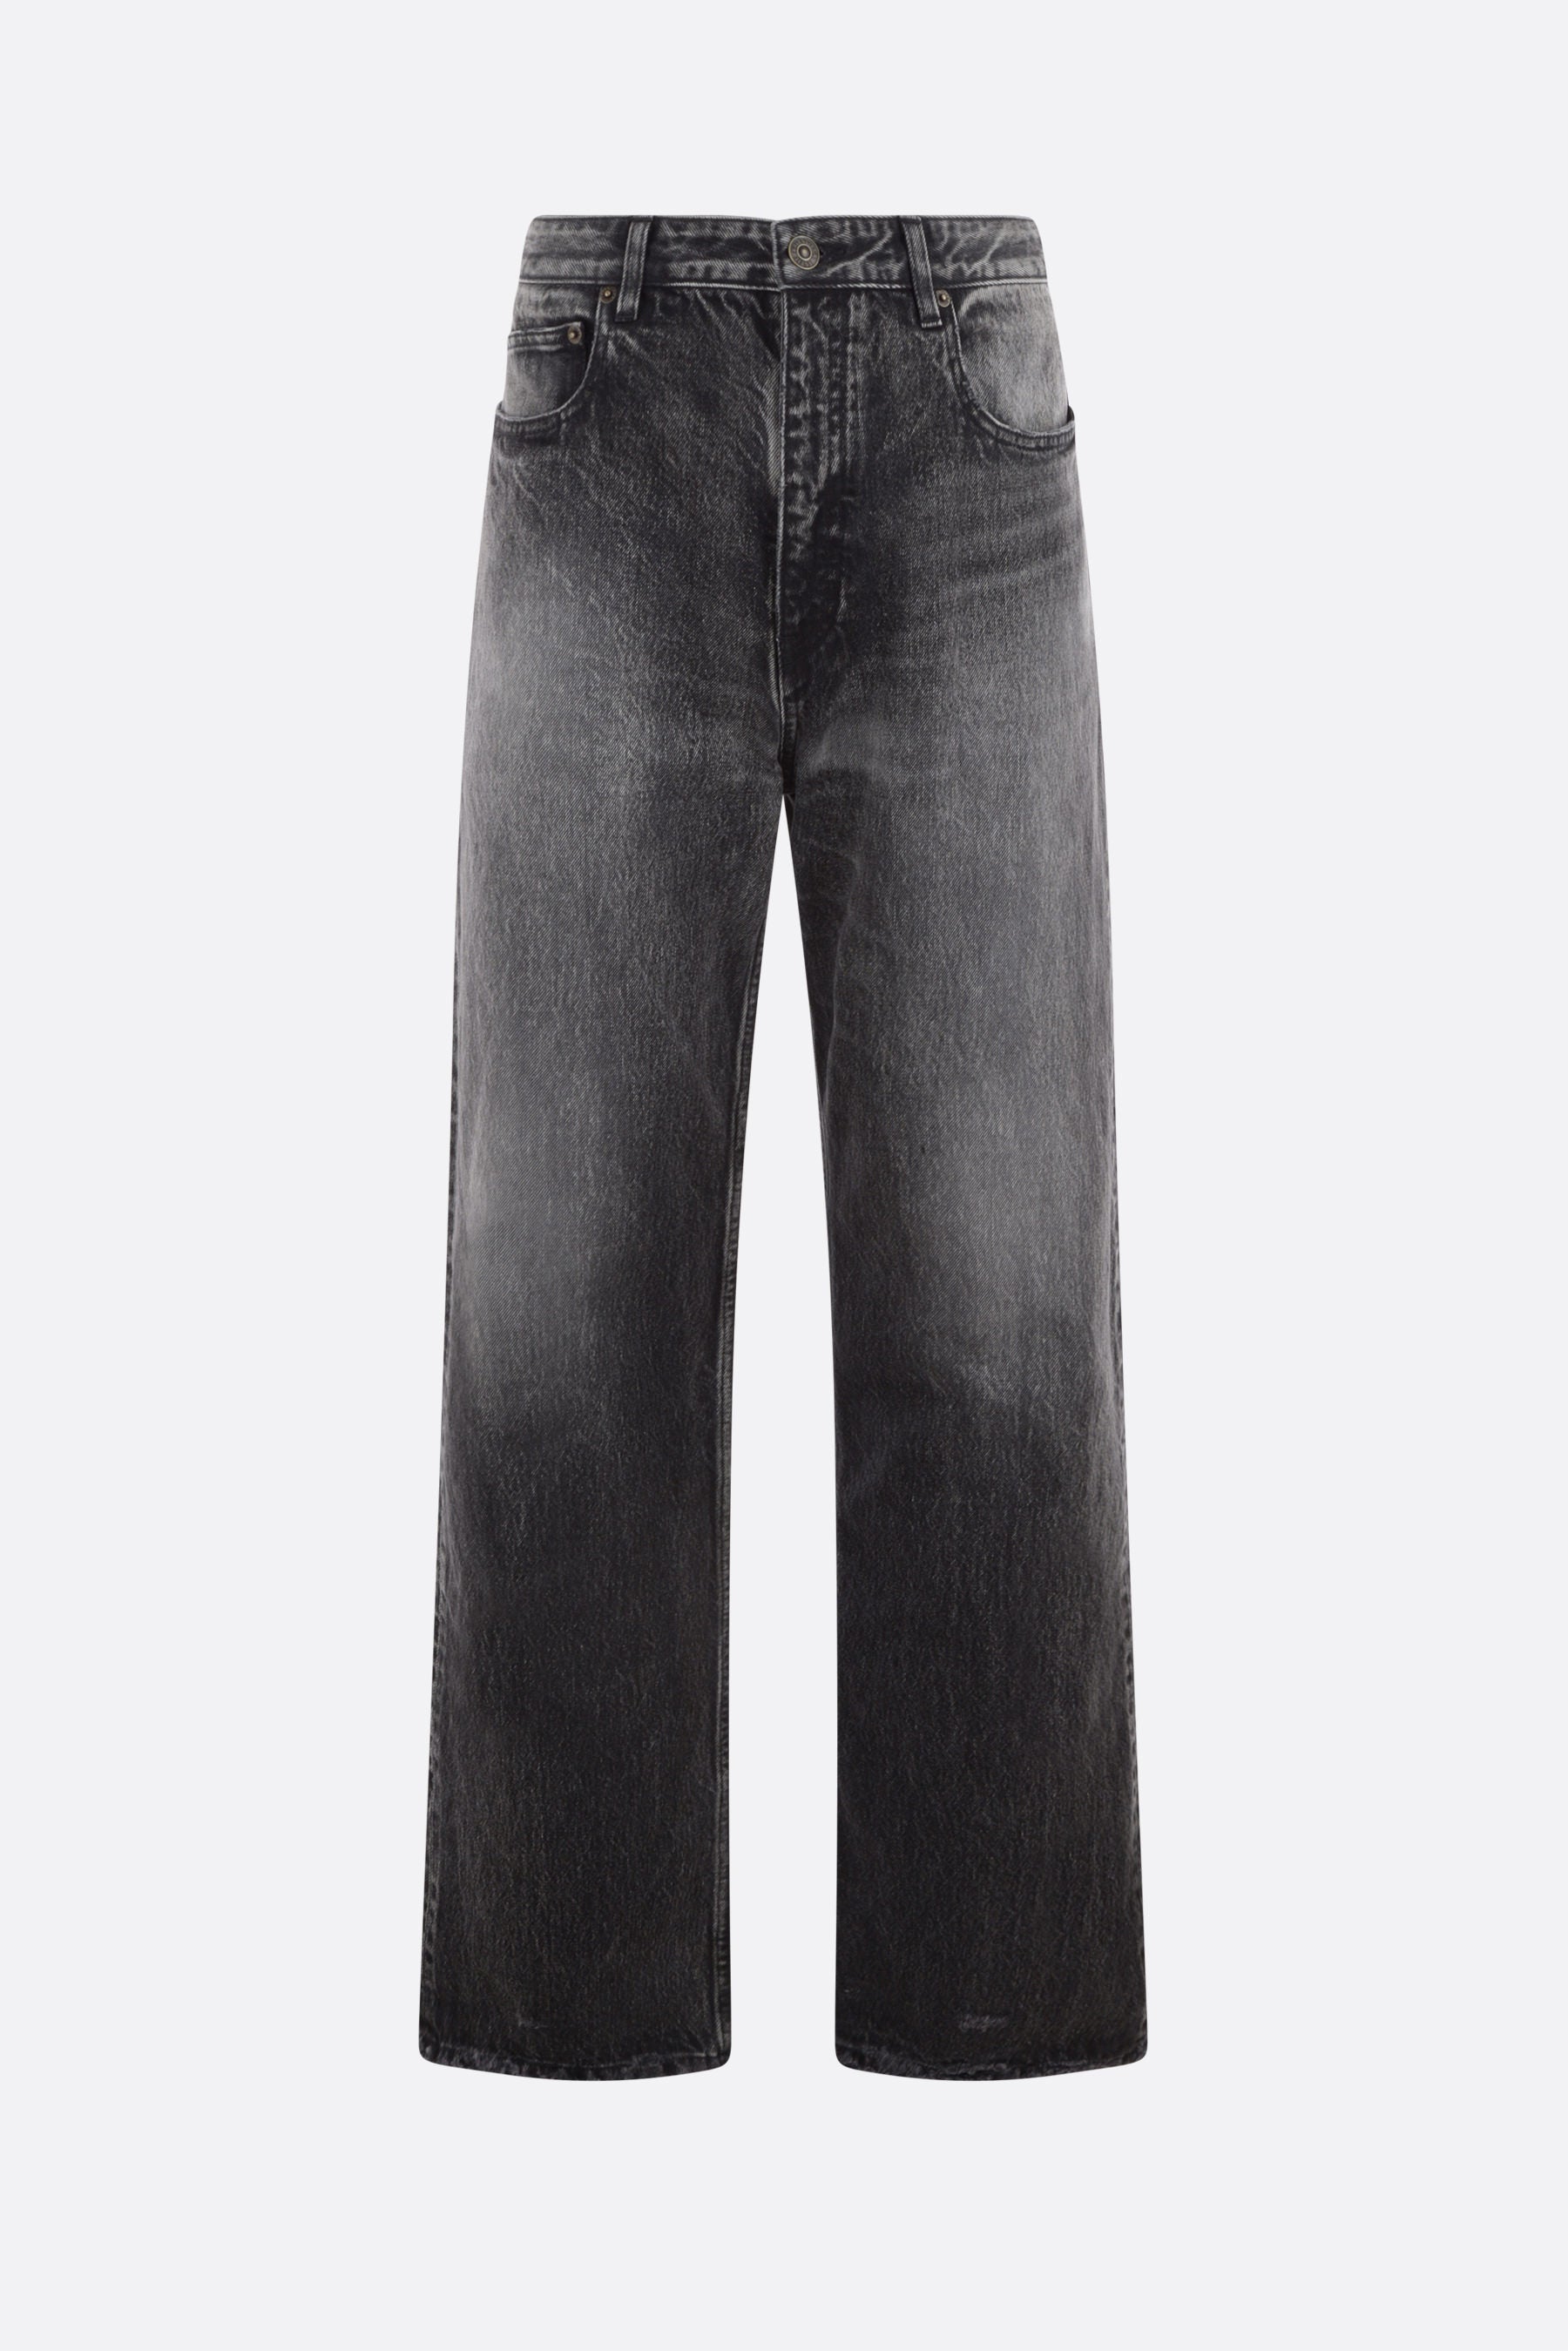 B PARIS 22SS Multi Belt Jeans With Oversized Pockets DENIM Selvedge Jeans  SWEATPANTS INDEPEND PANTS From Doul, $180.72